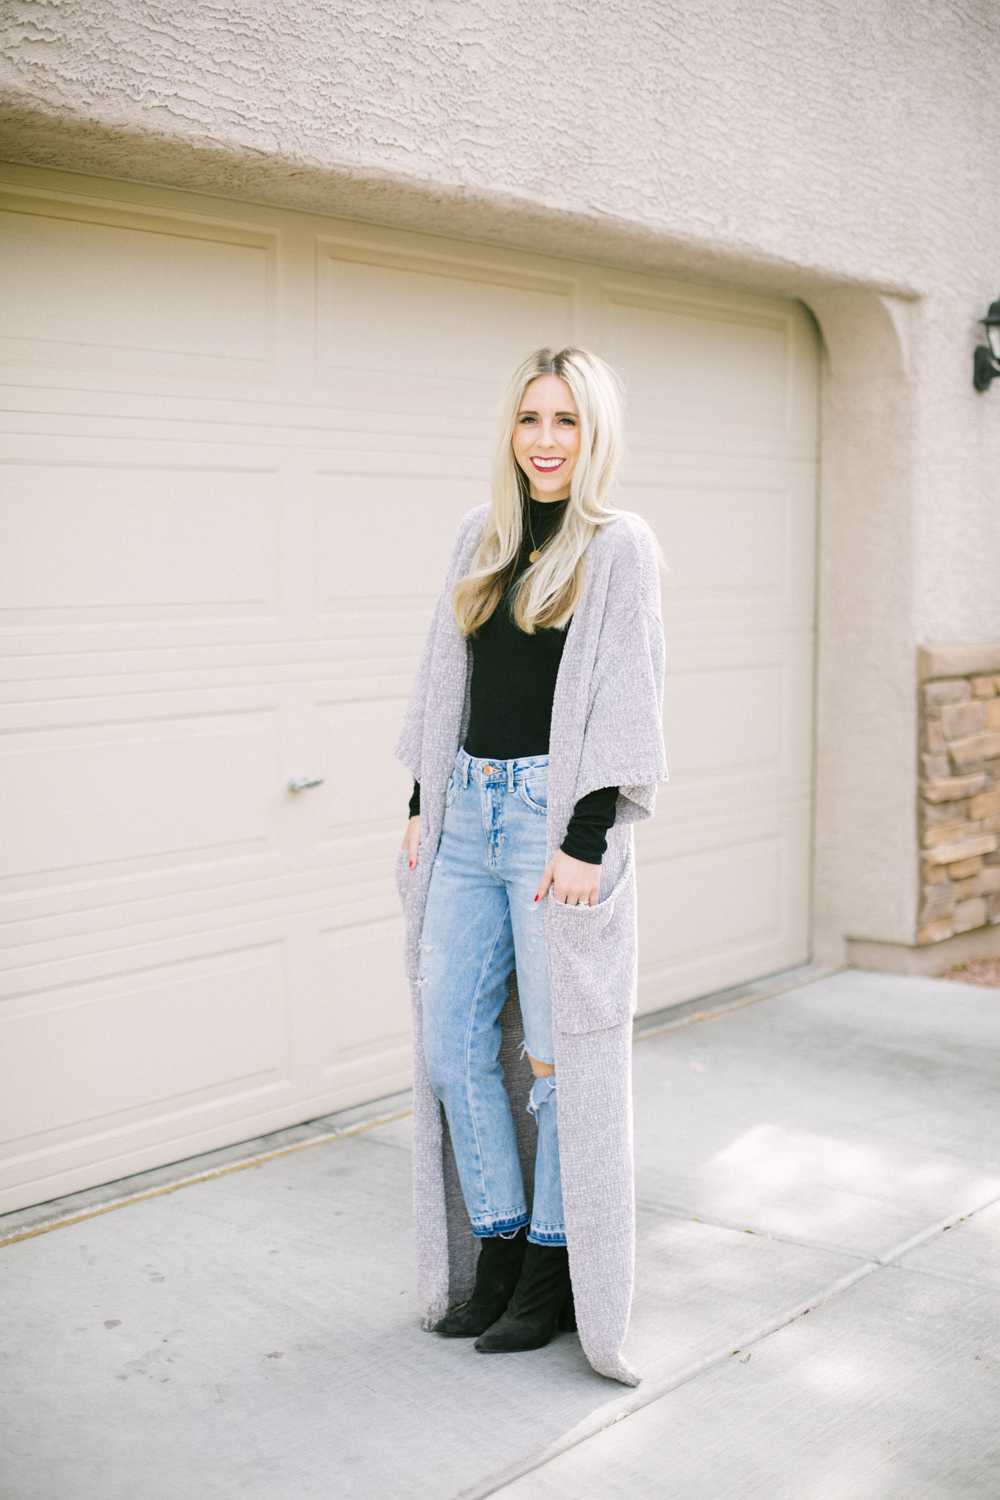 Holiday Season by Las Vegas style bloggers Life of a Sister